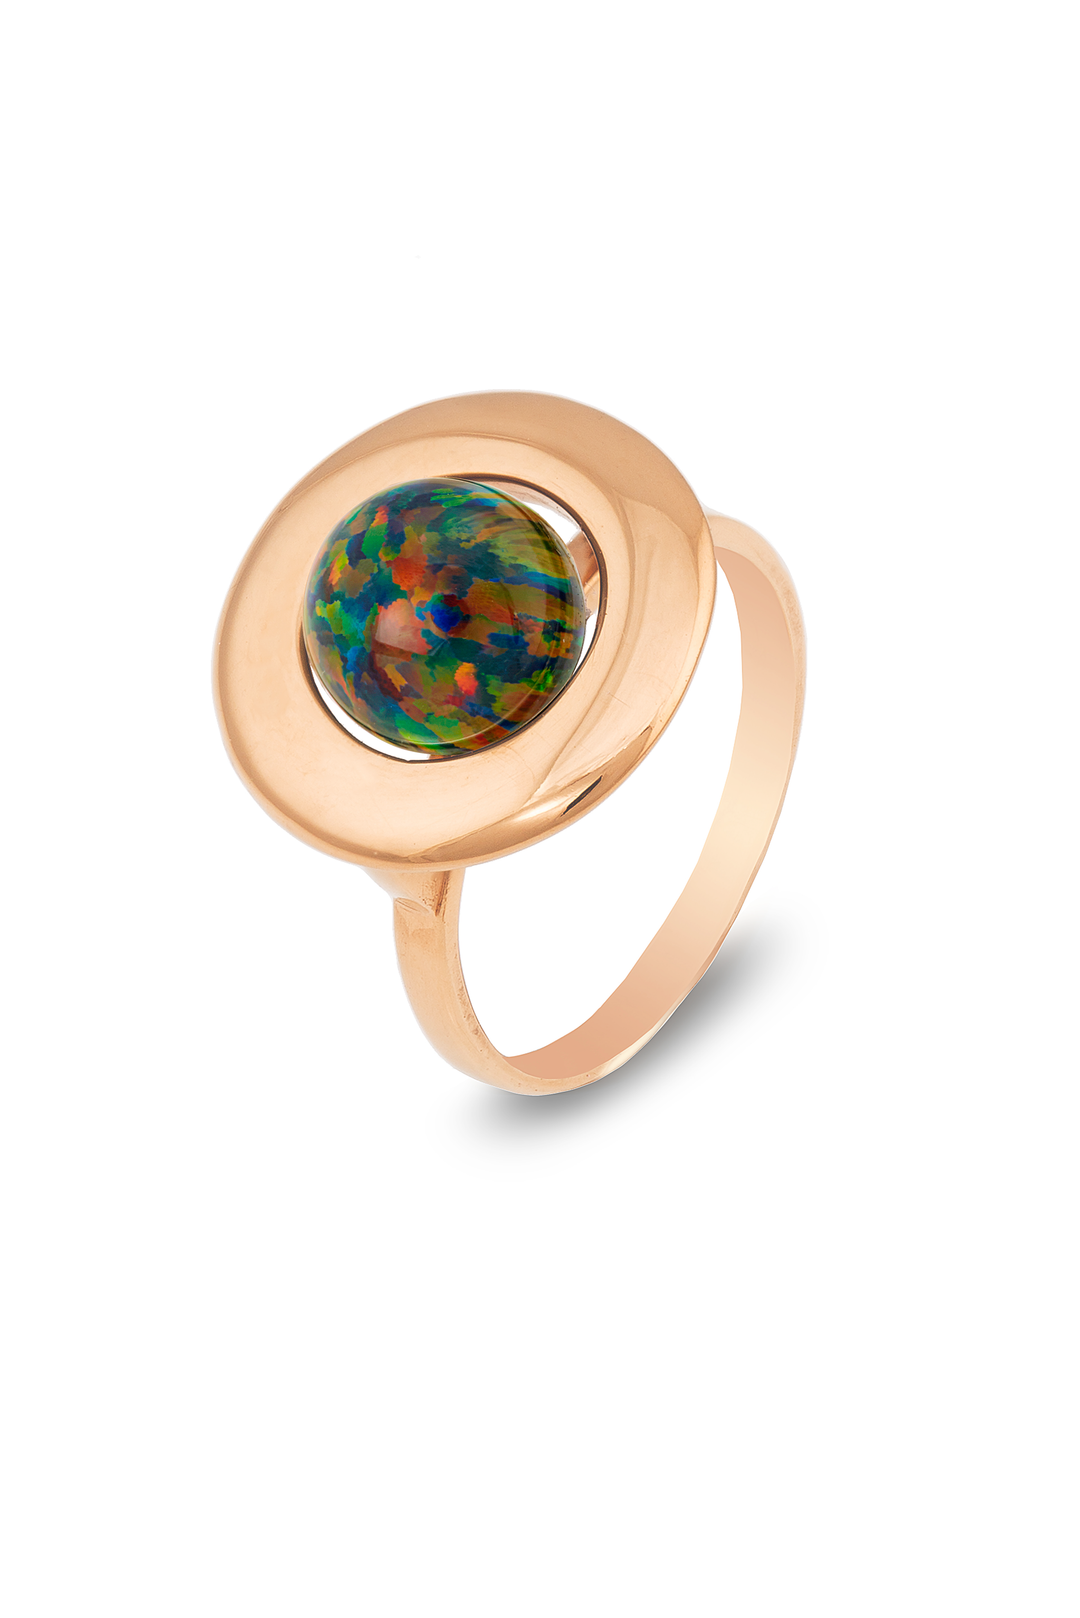 Home Planet Black Opal 9ct Gold